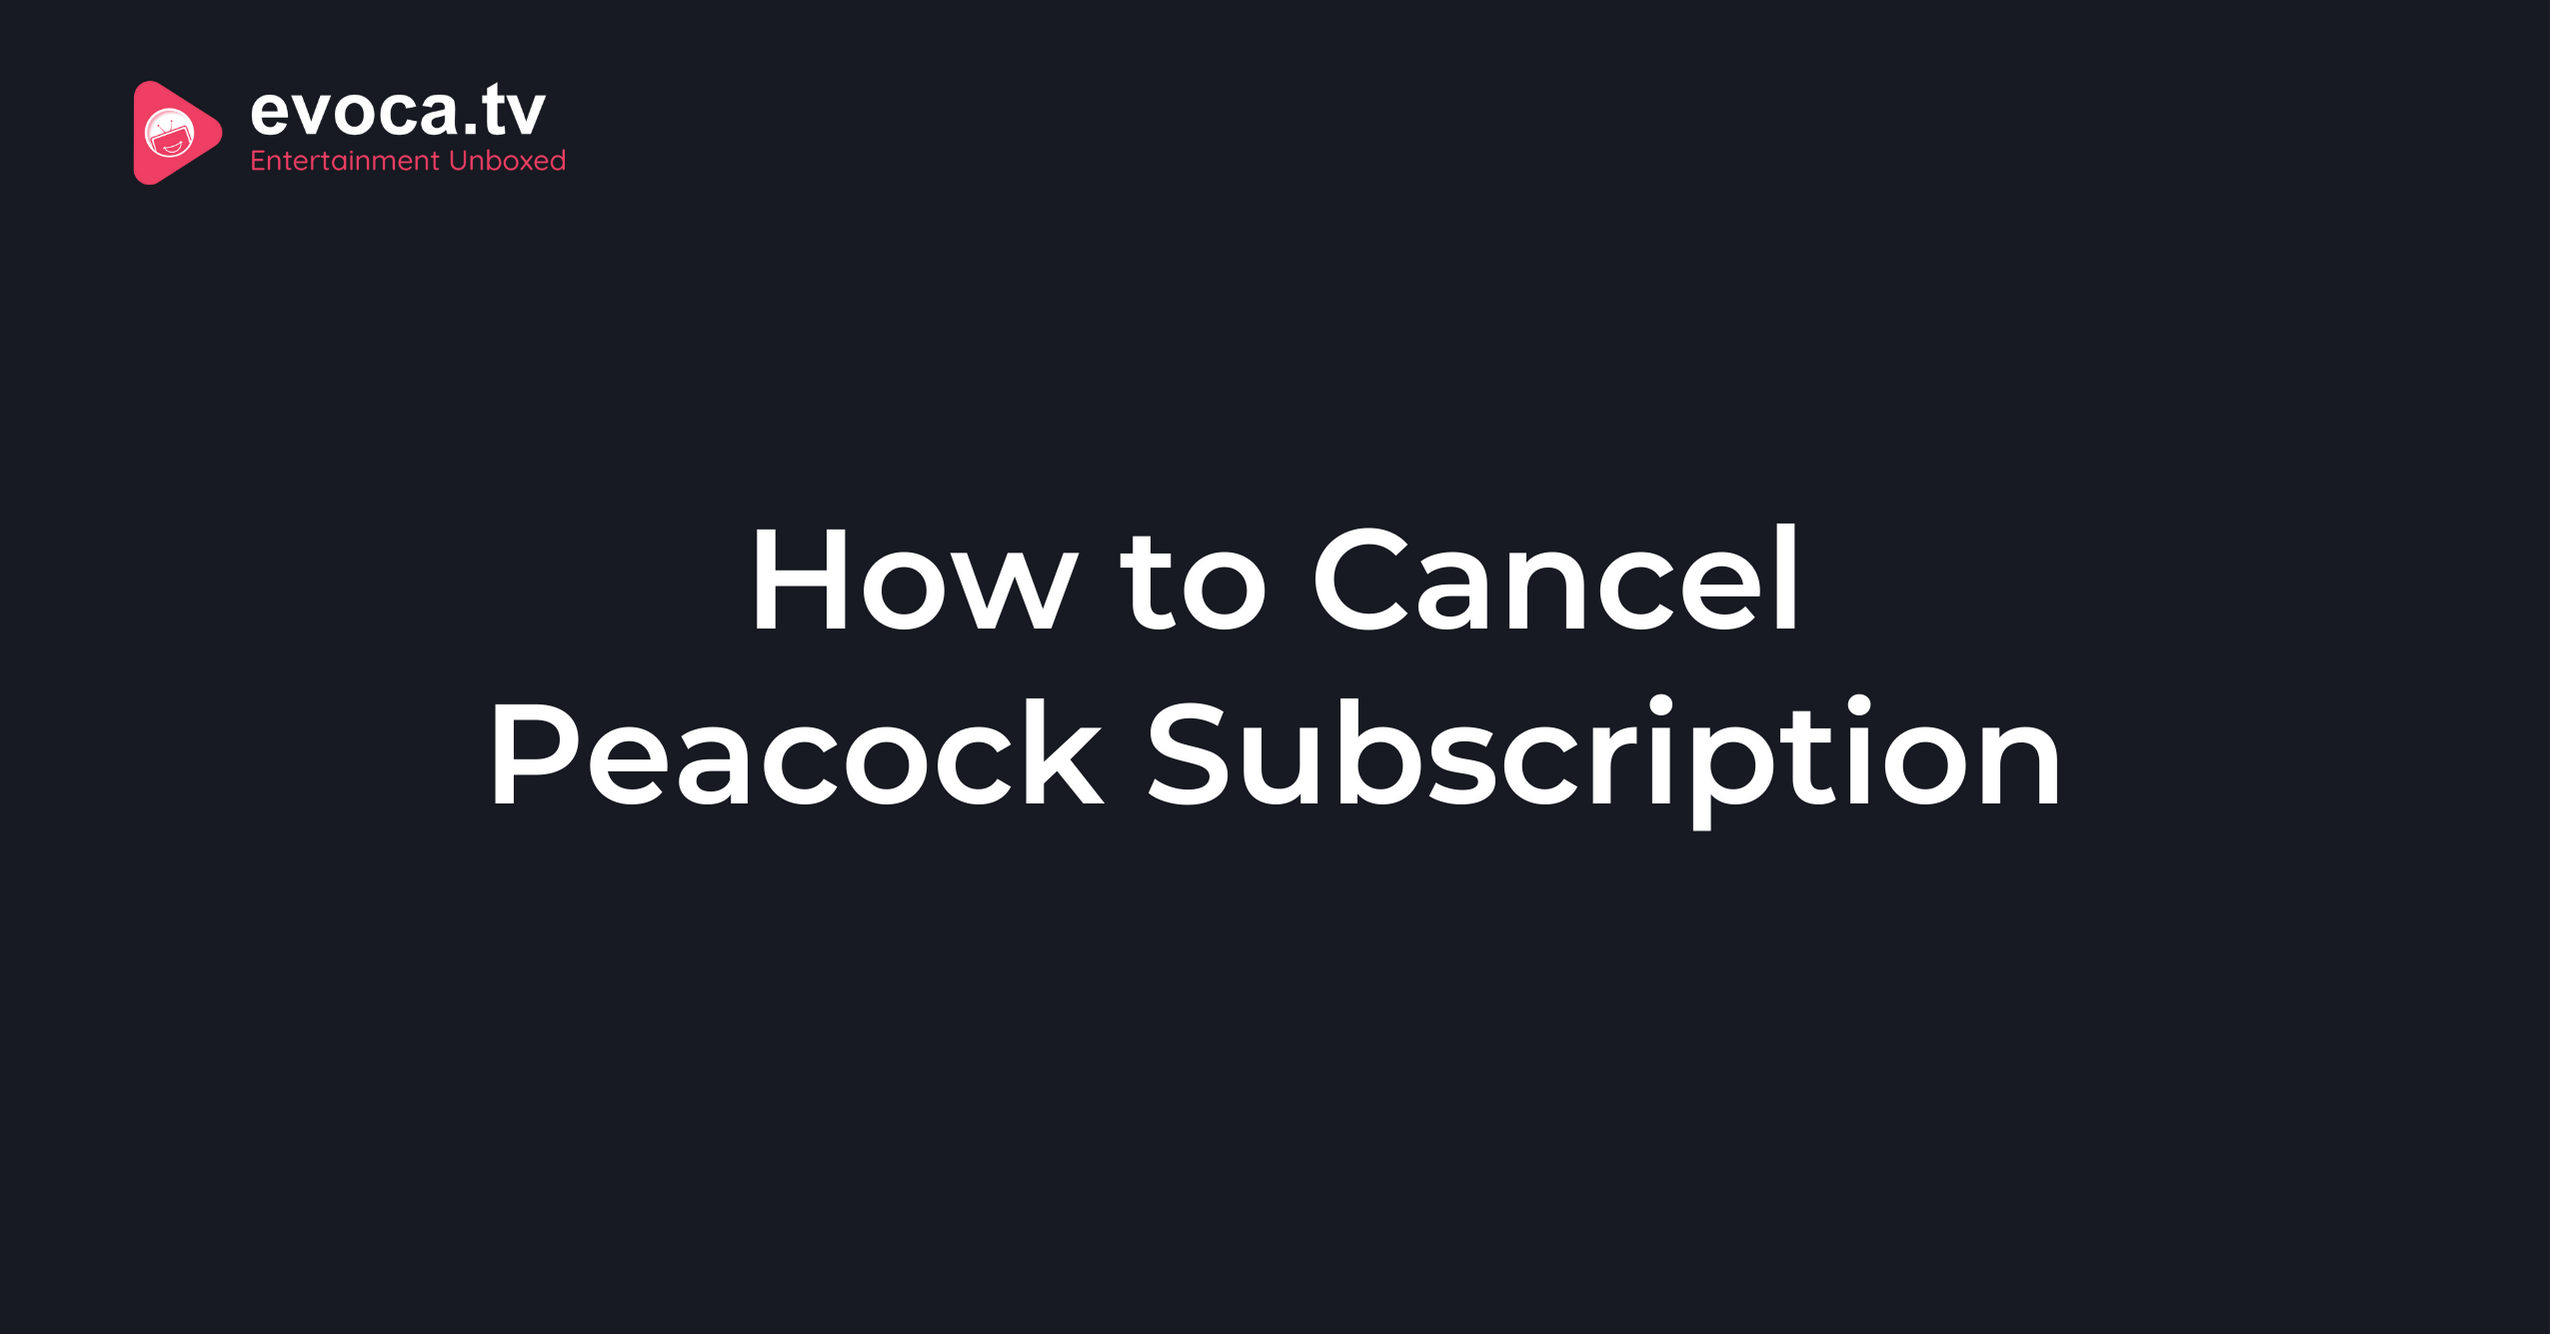 How to Cancel Peacock Subscription